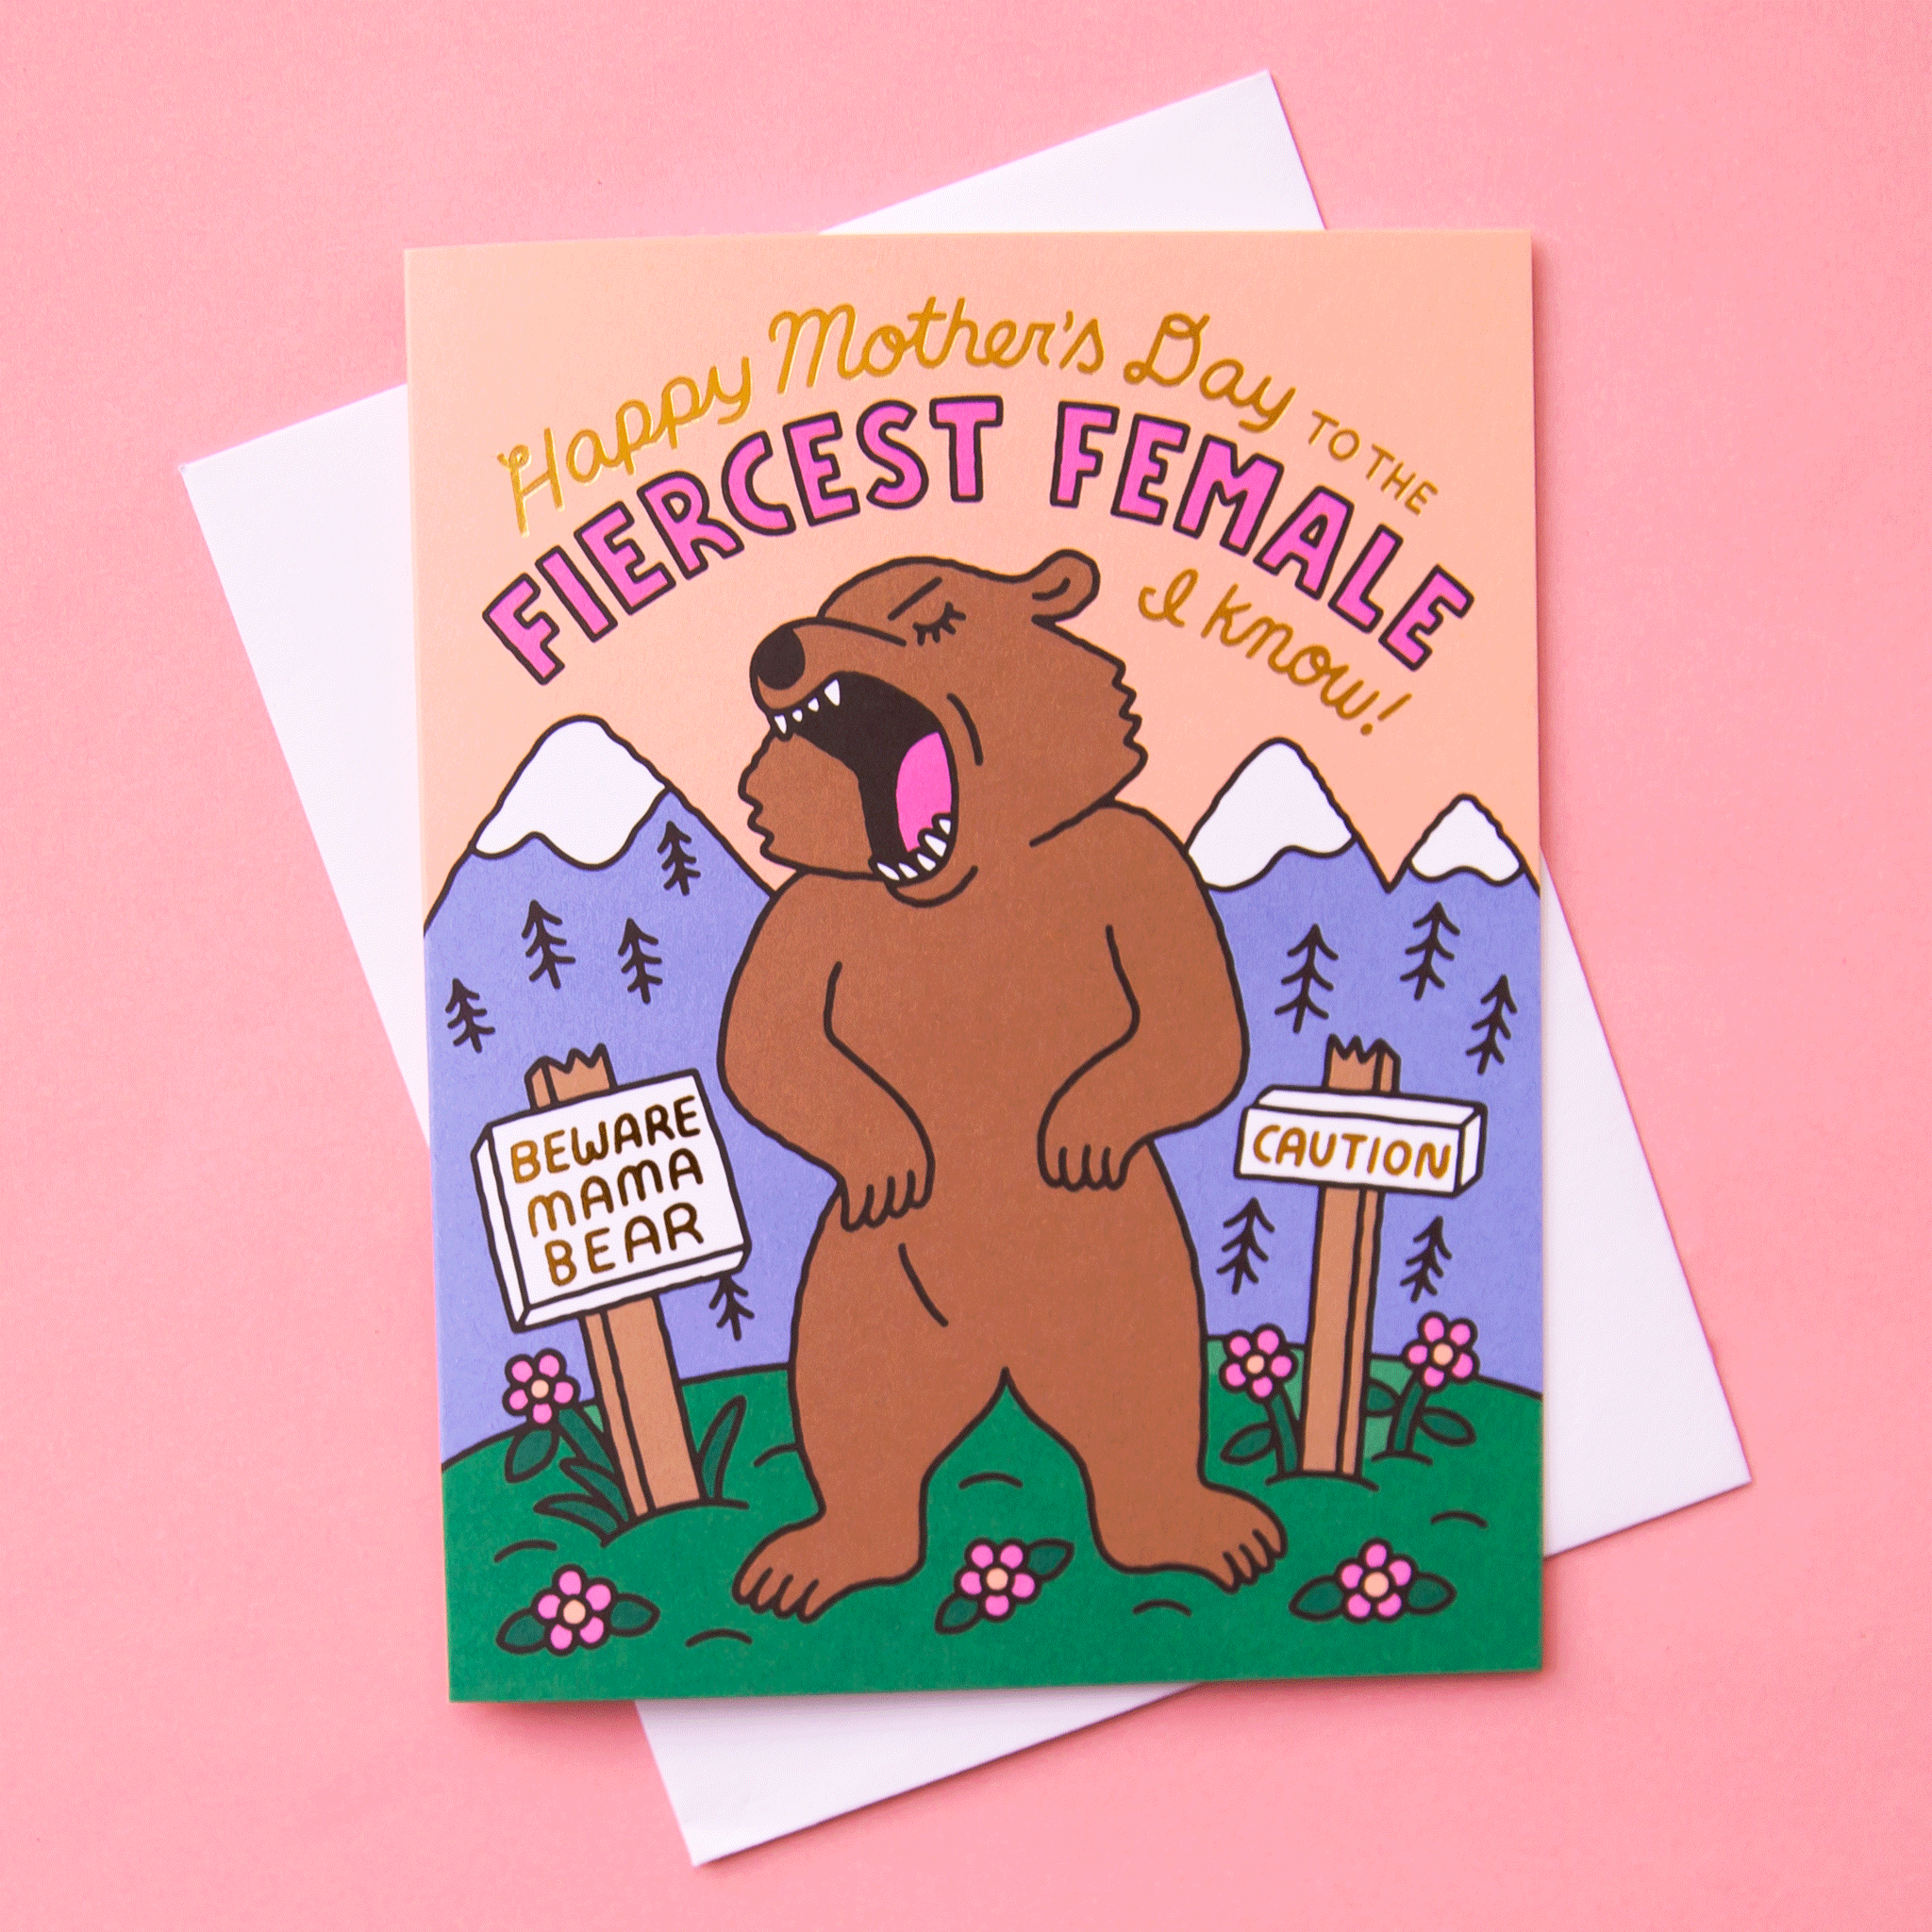 On a pink background is a card with a roaring mama bear illustrstion in front of a mountainous landscape and text above that reads, "Happy Mother's Day To The Fiercest Female I Know!" 